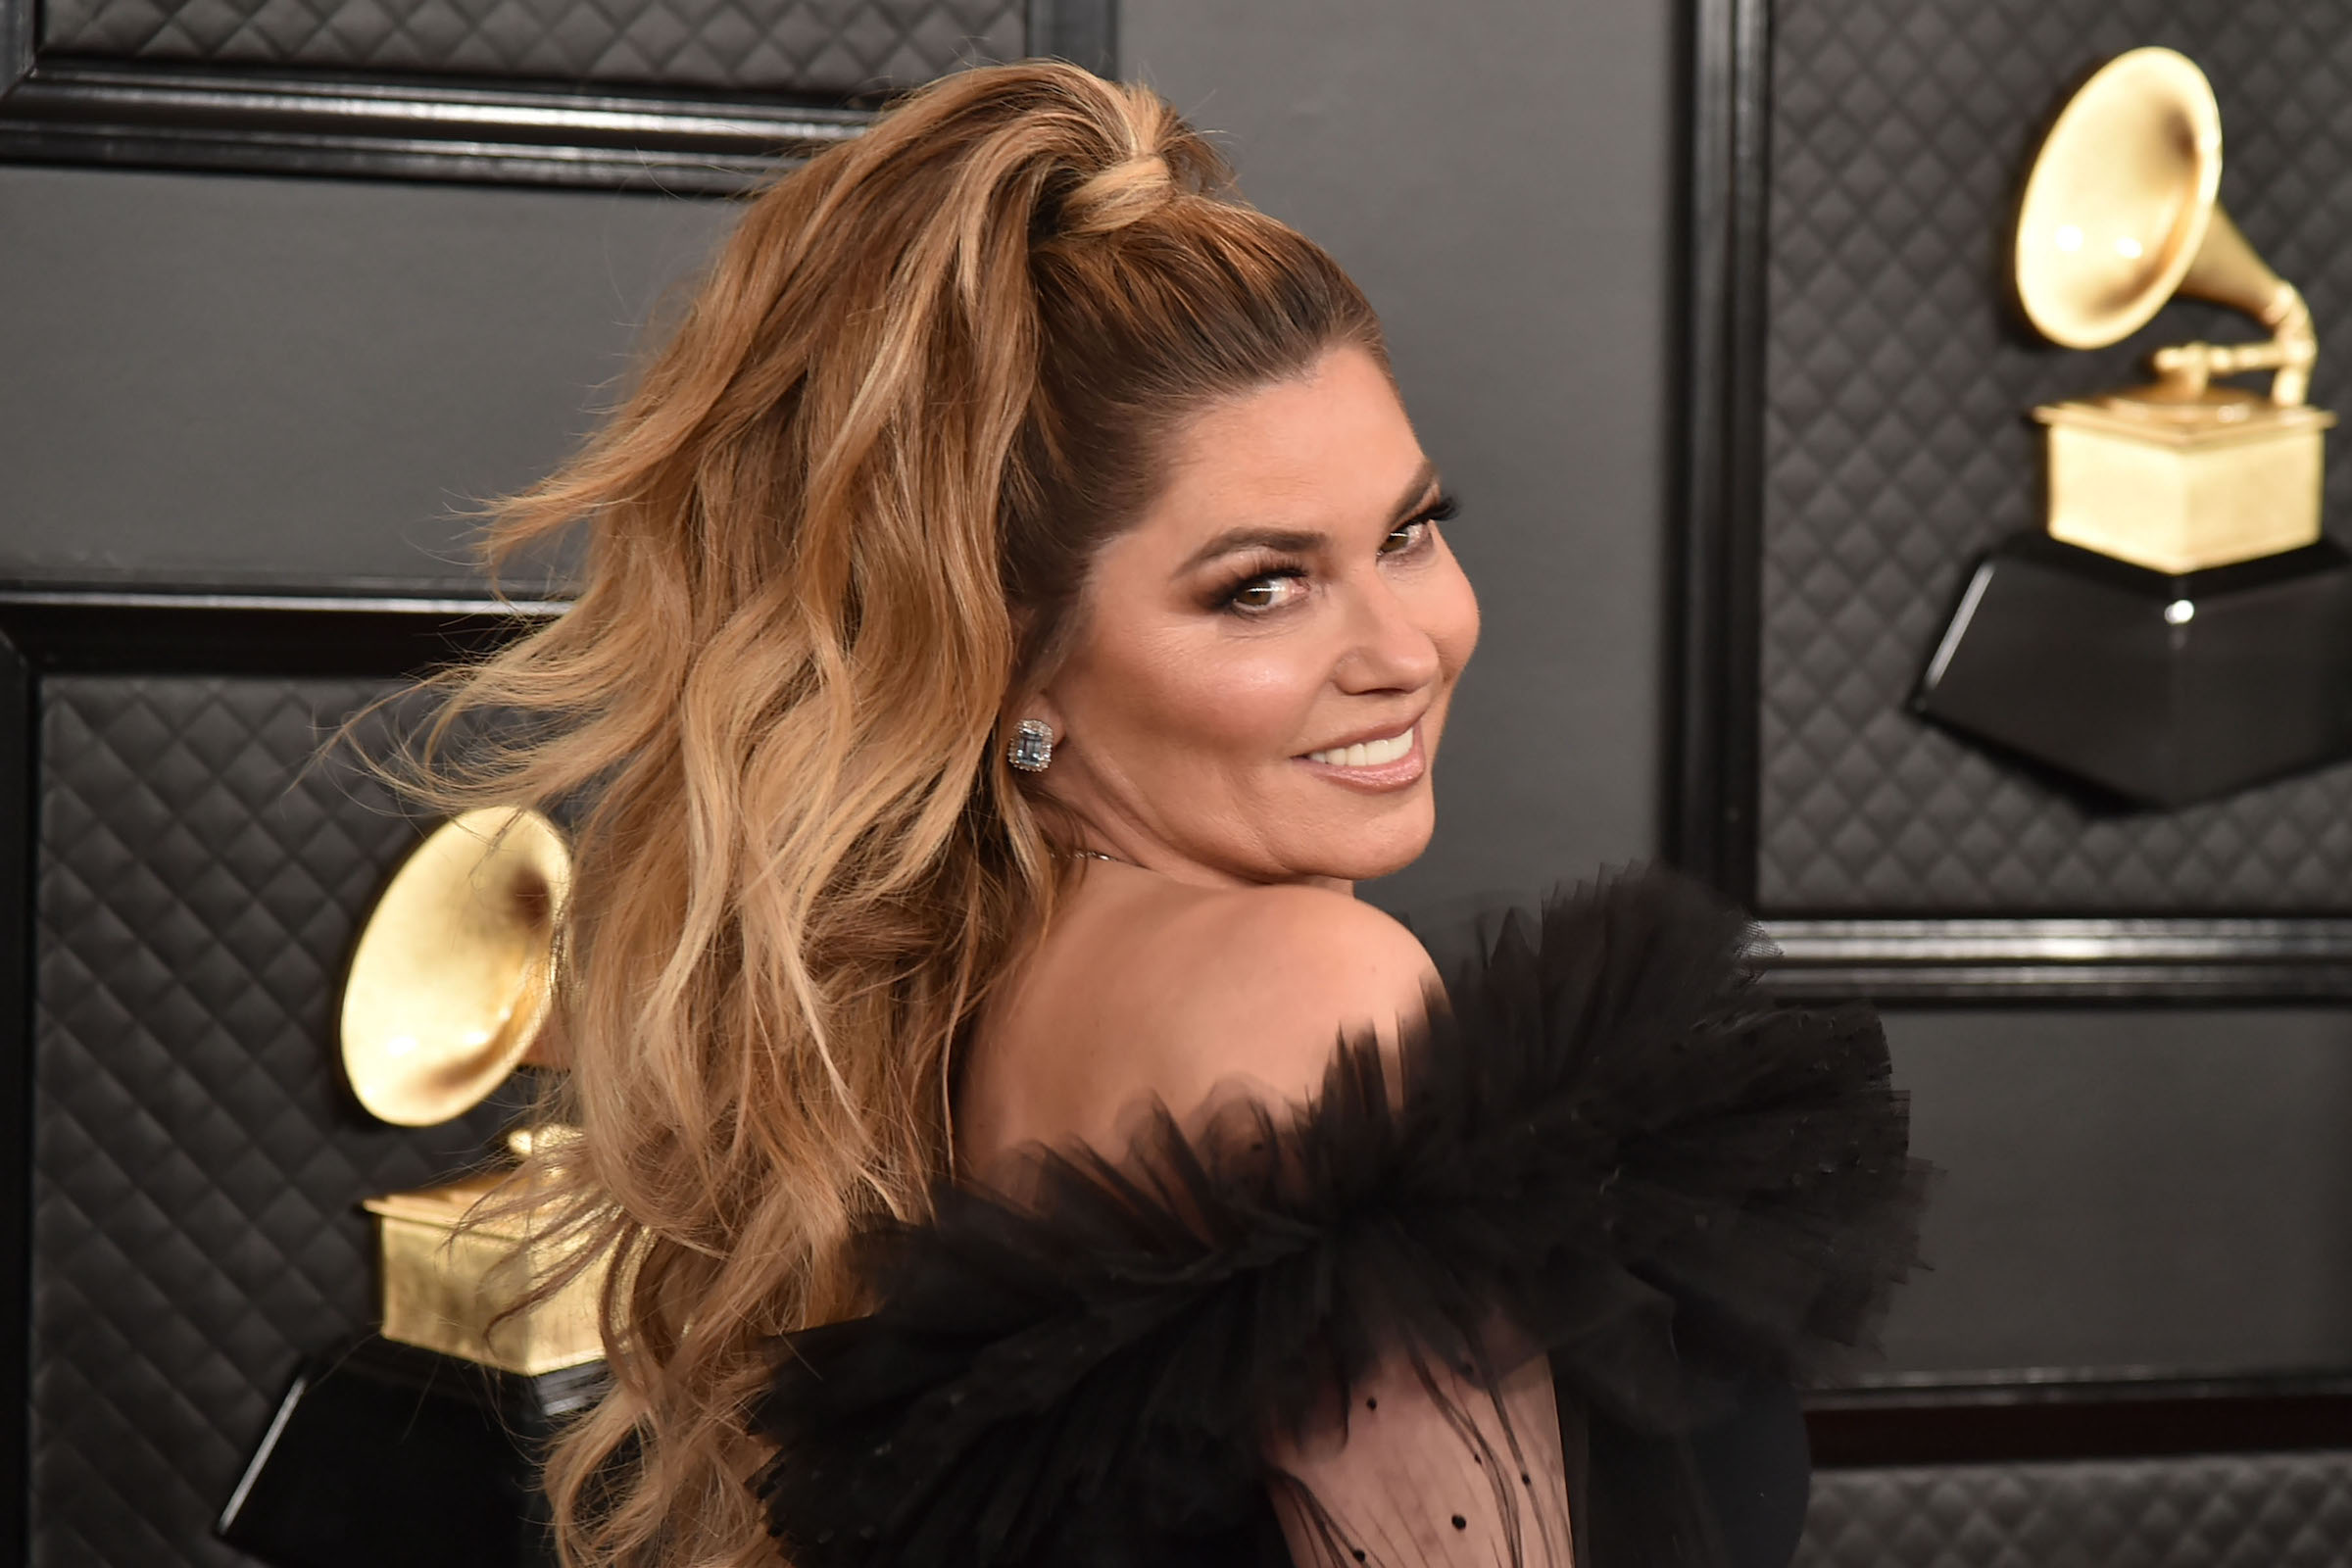 Shania Twain, who has an album and tour on the way, wearing a black dress